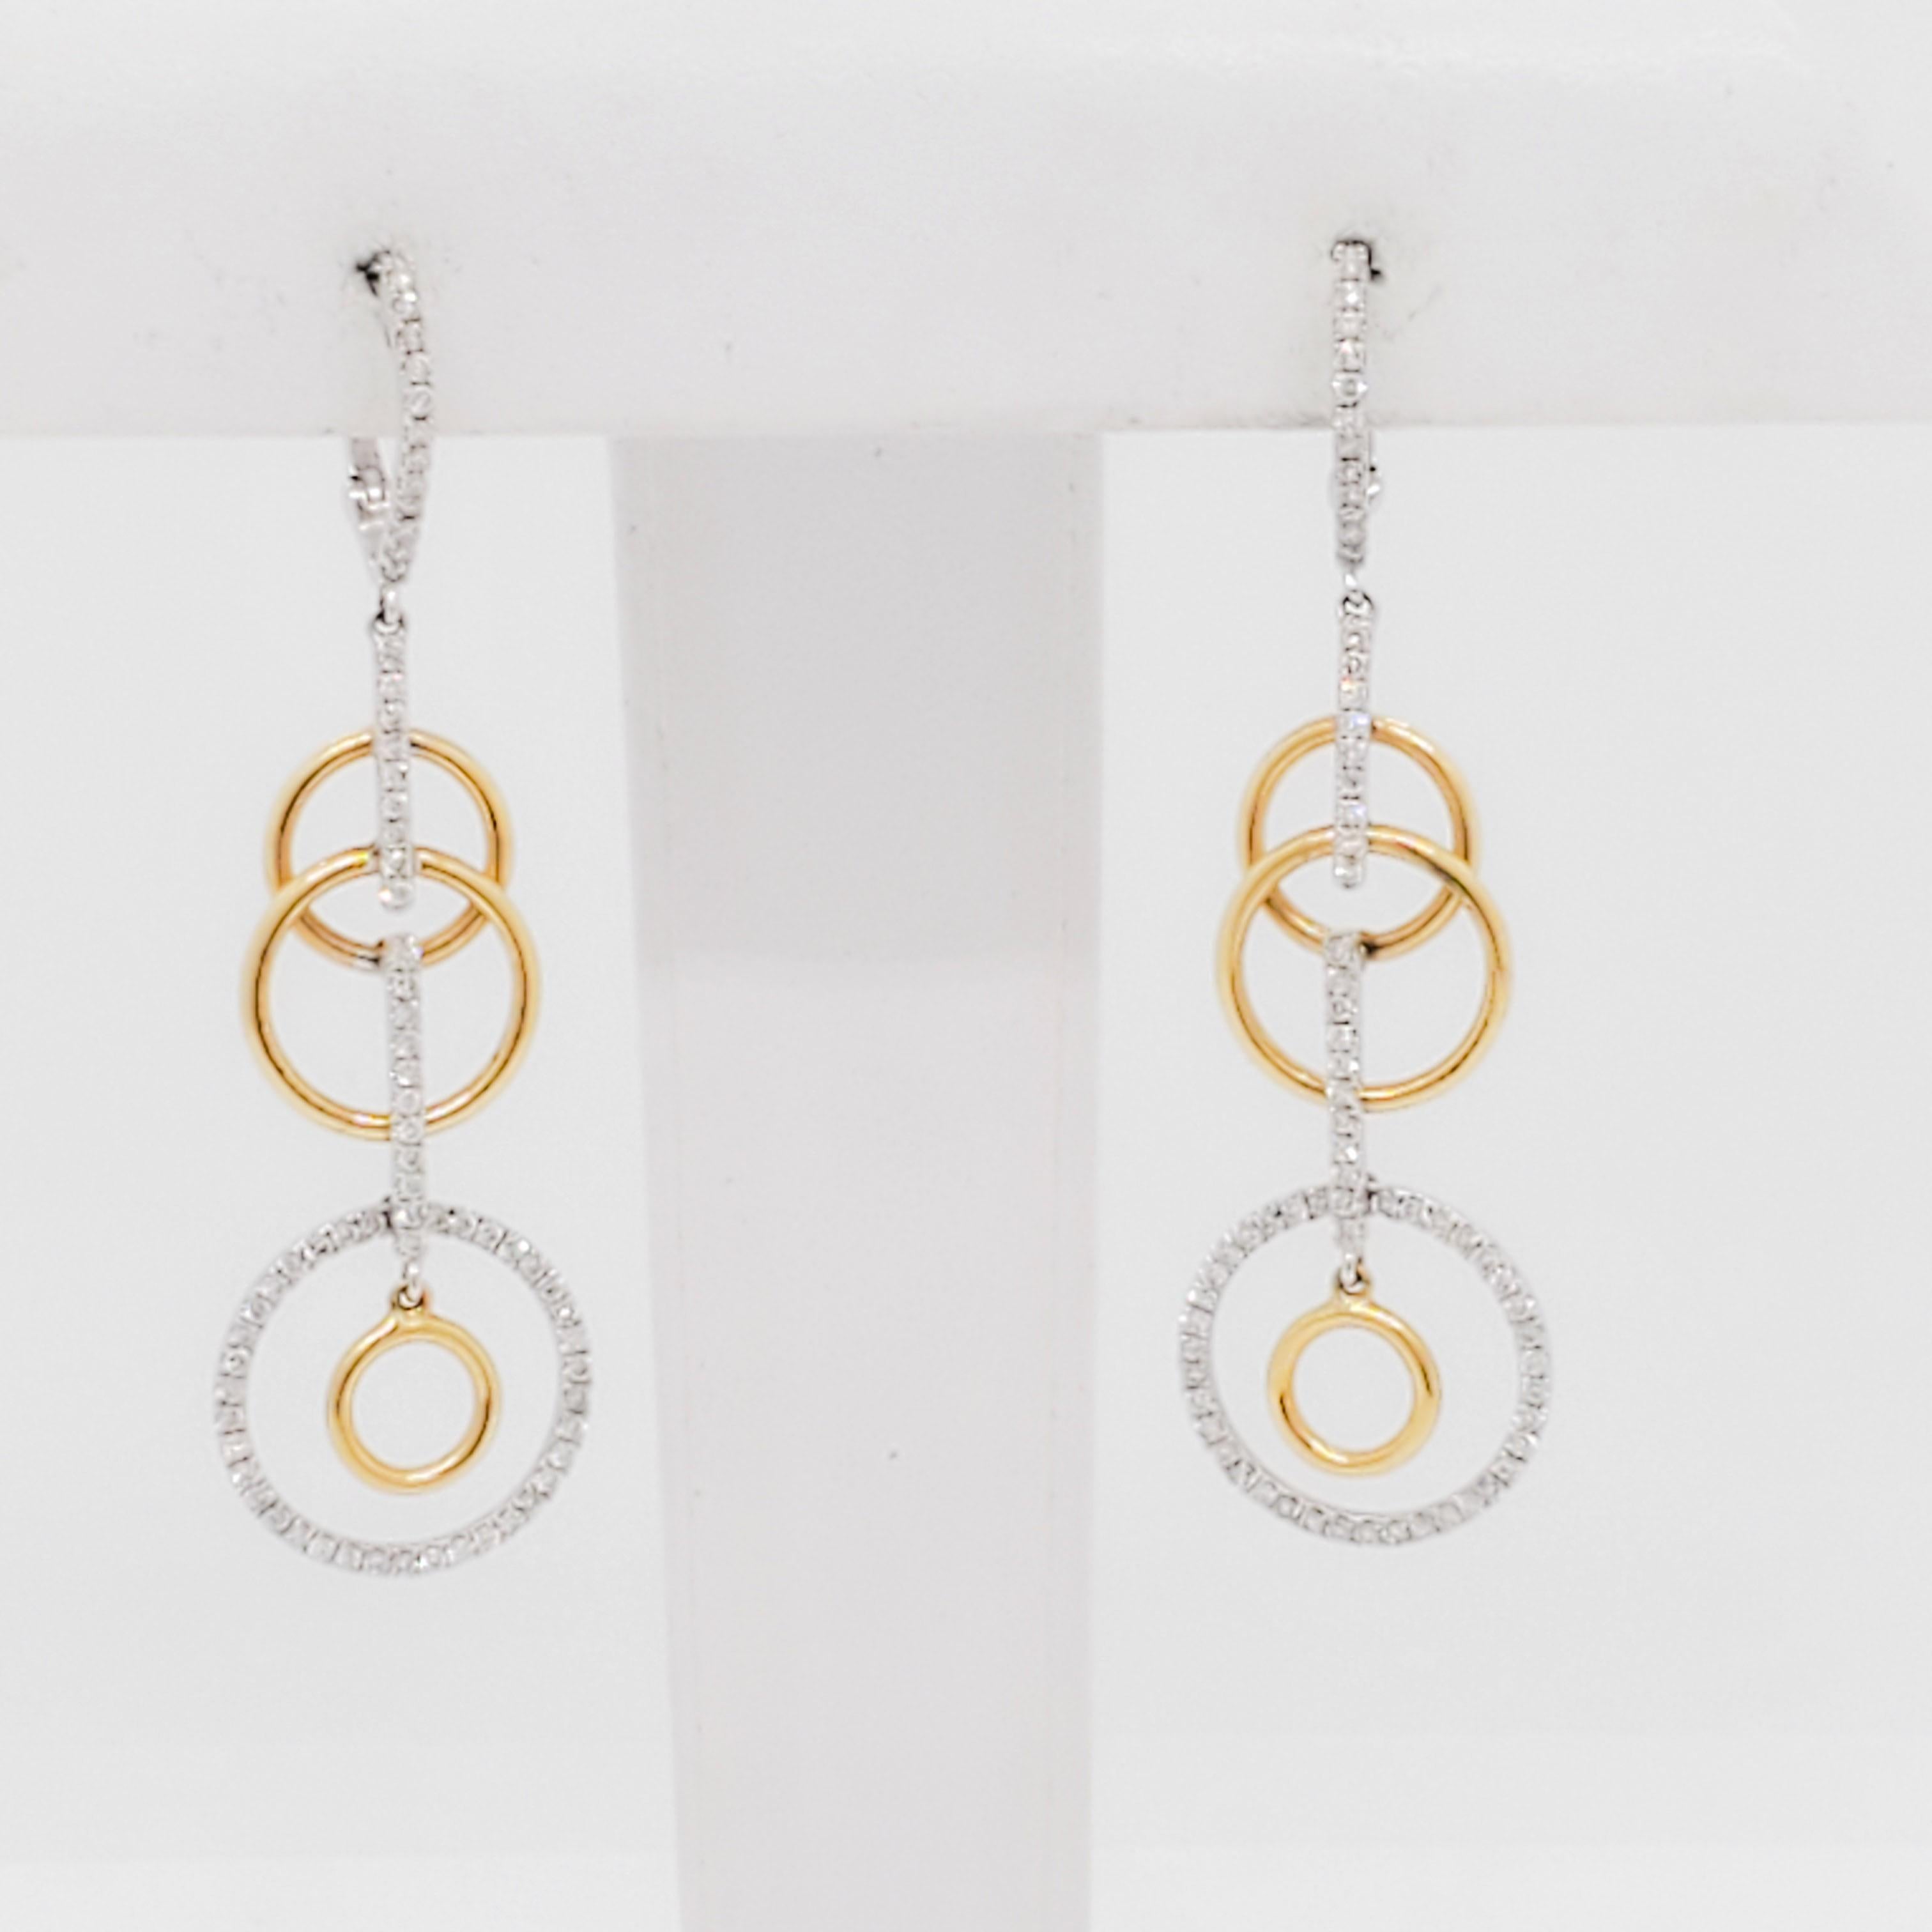 Beautiful earrings with 0.73 ct. good quality white diamond rounds in multiple circles.  Handmade in 14k white and yellow gold.  Perfect for any occasion and easy to wear.